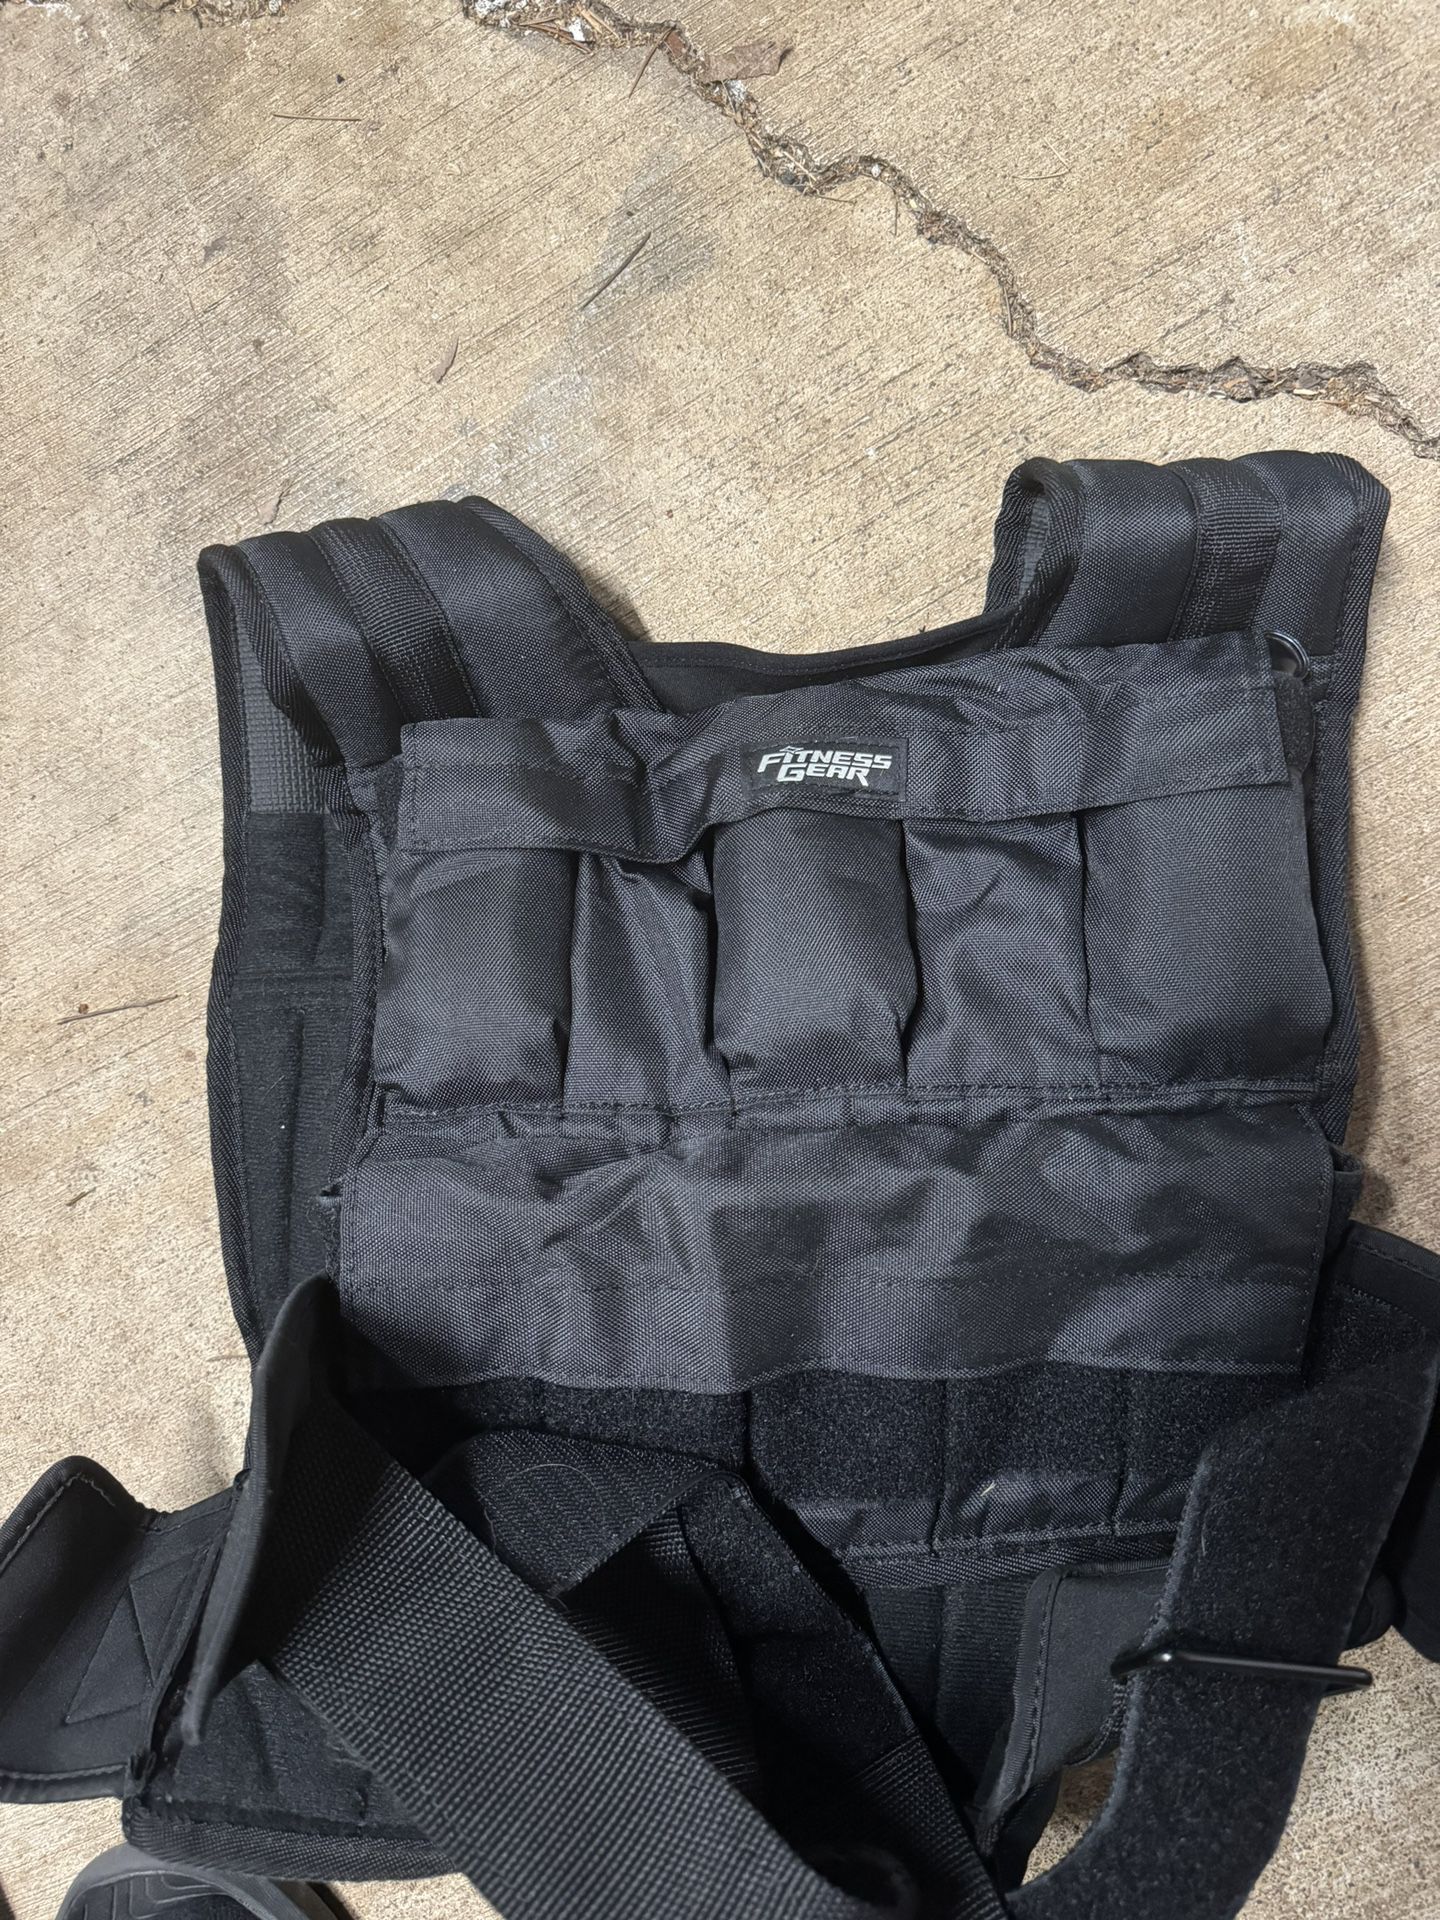 Fitness Gear Weighted Vest